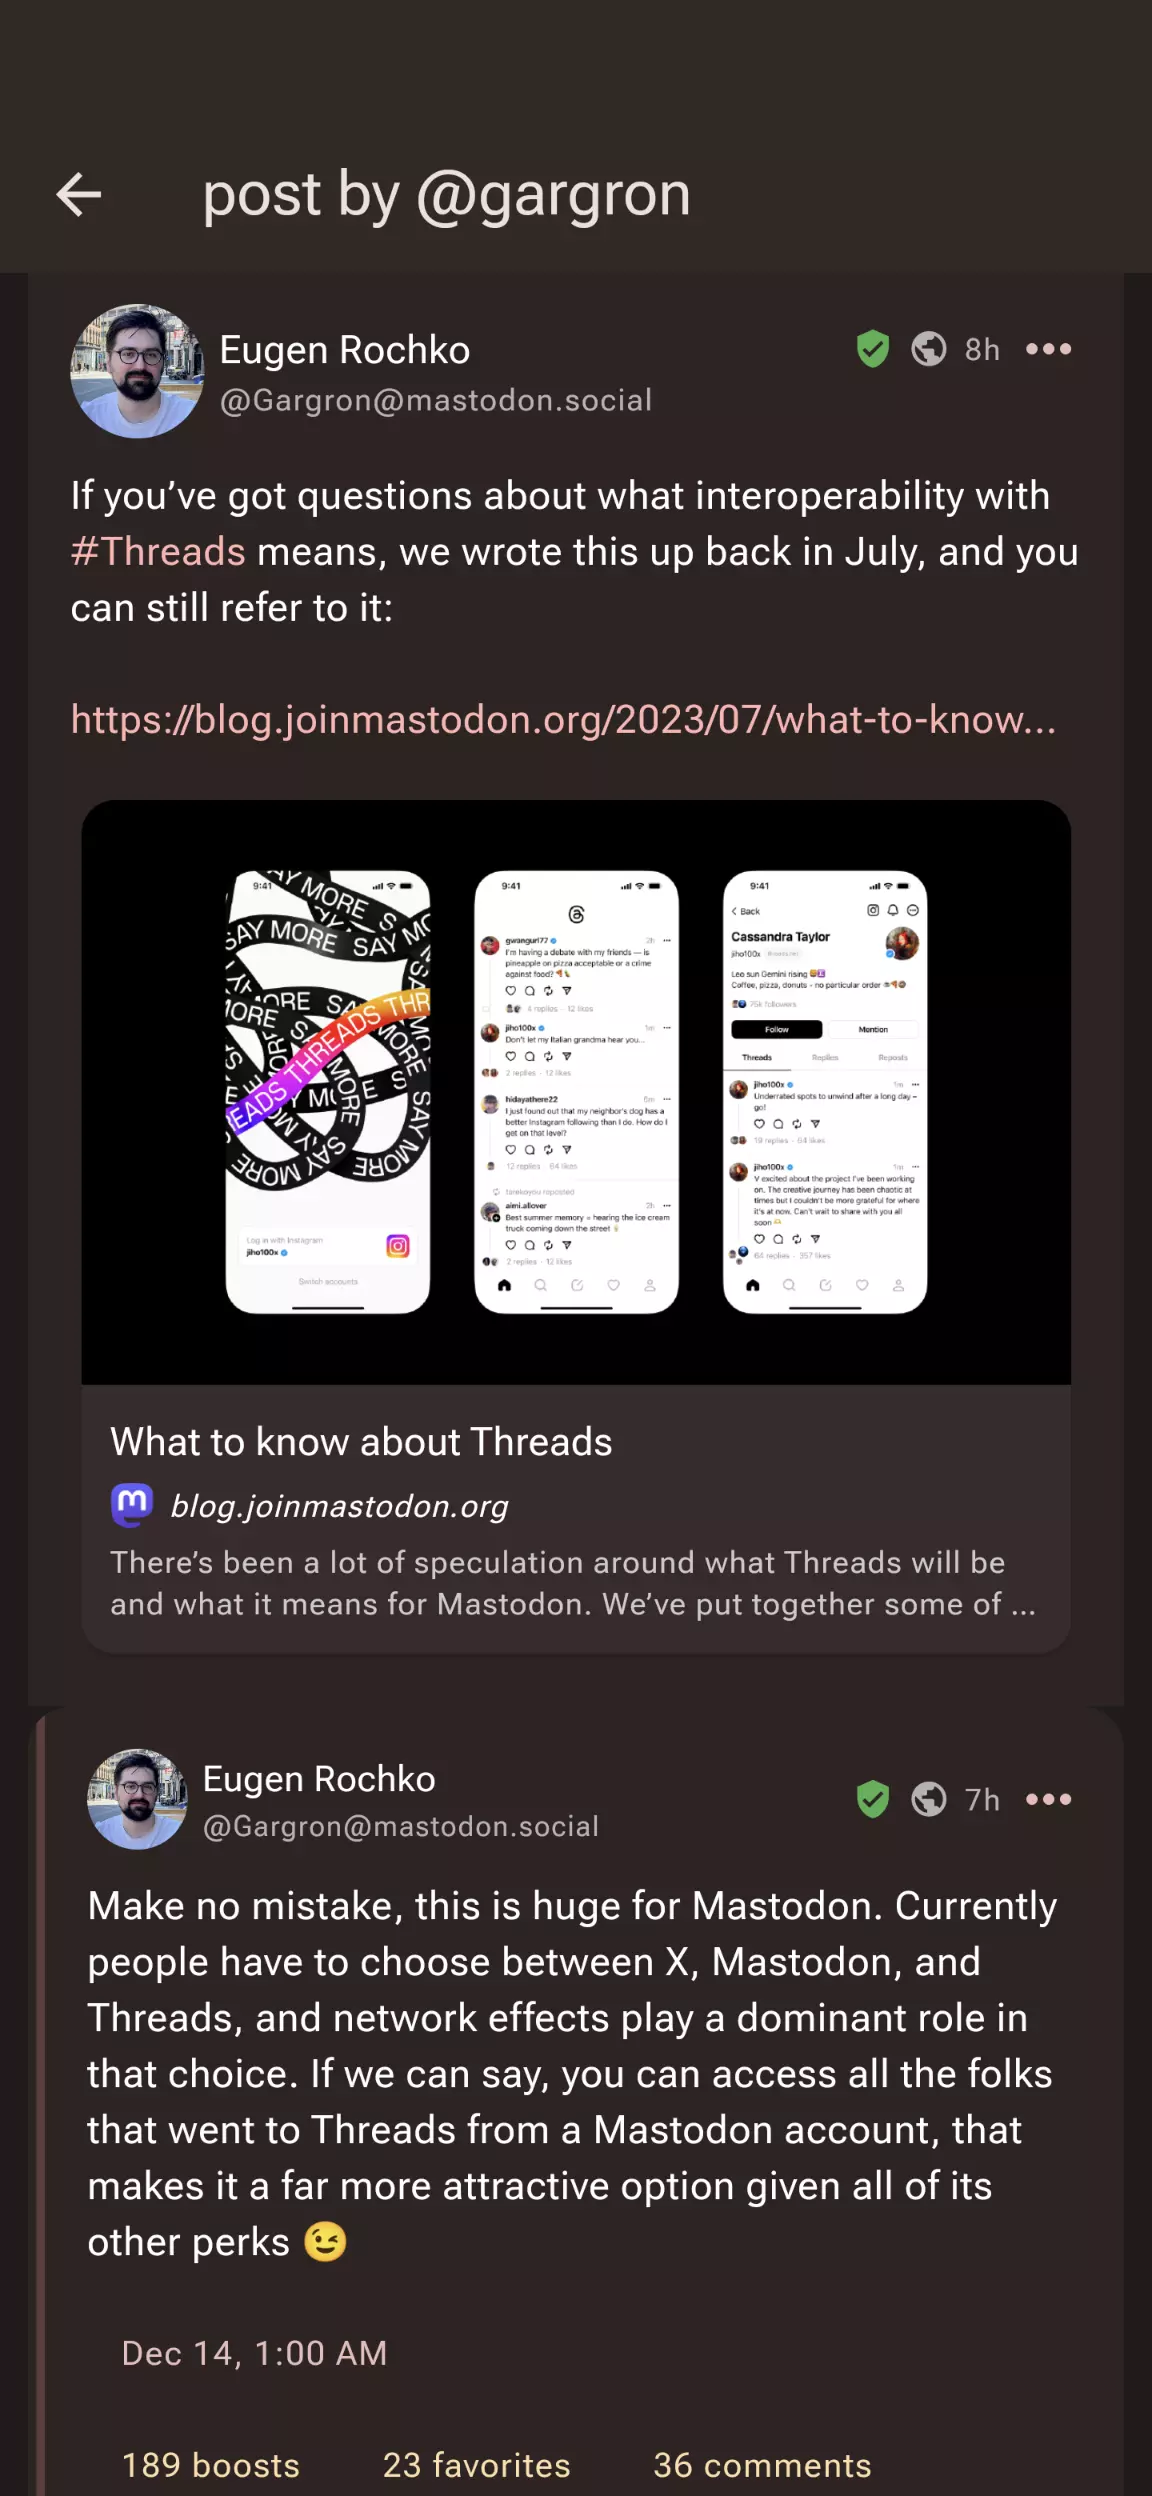 Eugen Rochko: <q>if you've got questions about what
interoperability with Threads means, we wrote this up back in July,
and you can still refer to it. Make no mistake, this is huge for
Mastodon. Currently people have to choose between X, Mastodon, and
Threads, and network effects play a dominant role in that choice. IF
we can say, you can access all the folks that went to Threads from a
Mastodon account, that makes it a far more attractive option given all
of its other perks :winking_face: